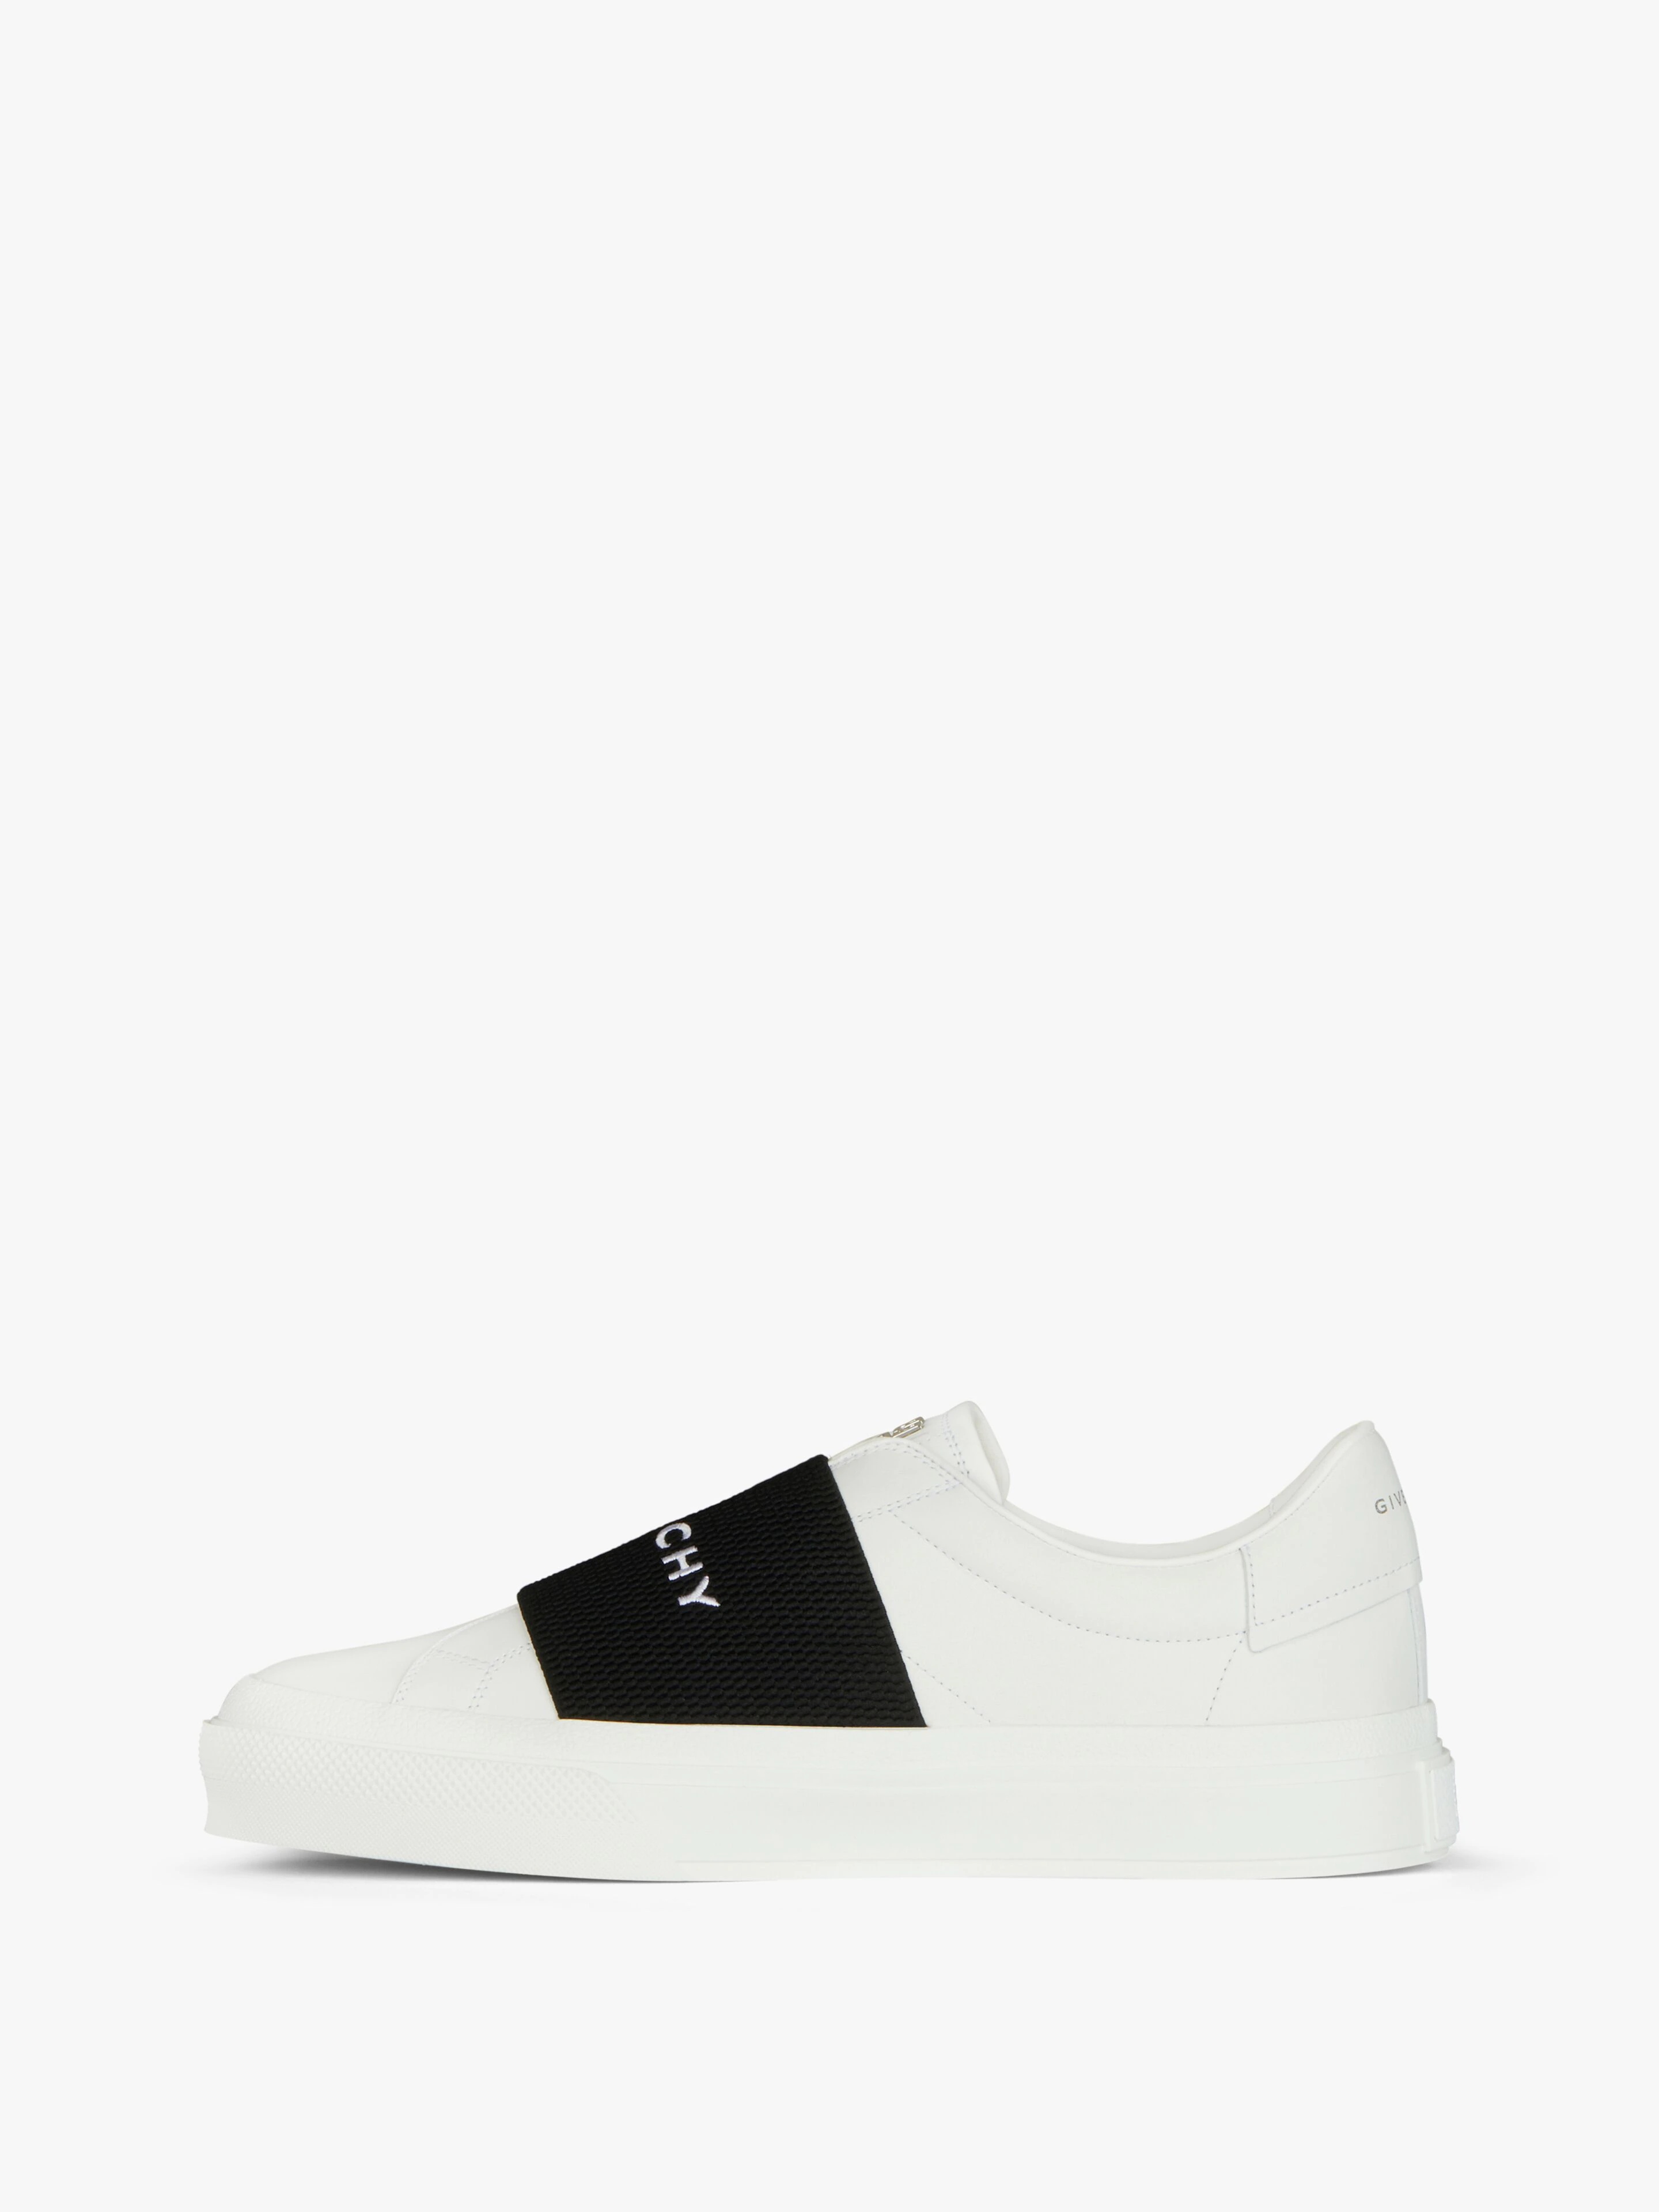 CITY SPORT SNEAKERS IN LEATHER WITH GIVENCHY STRAP - 3